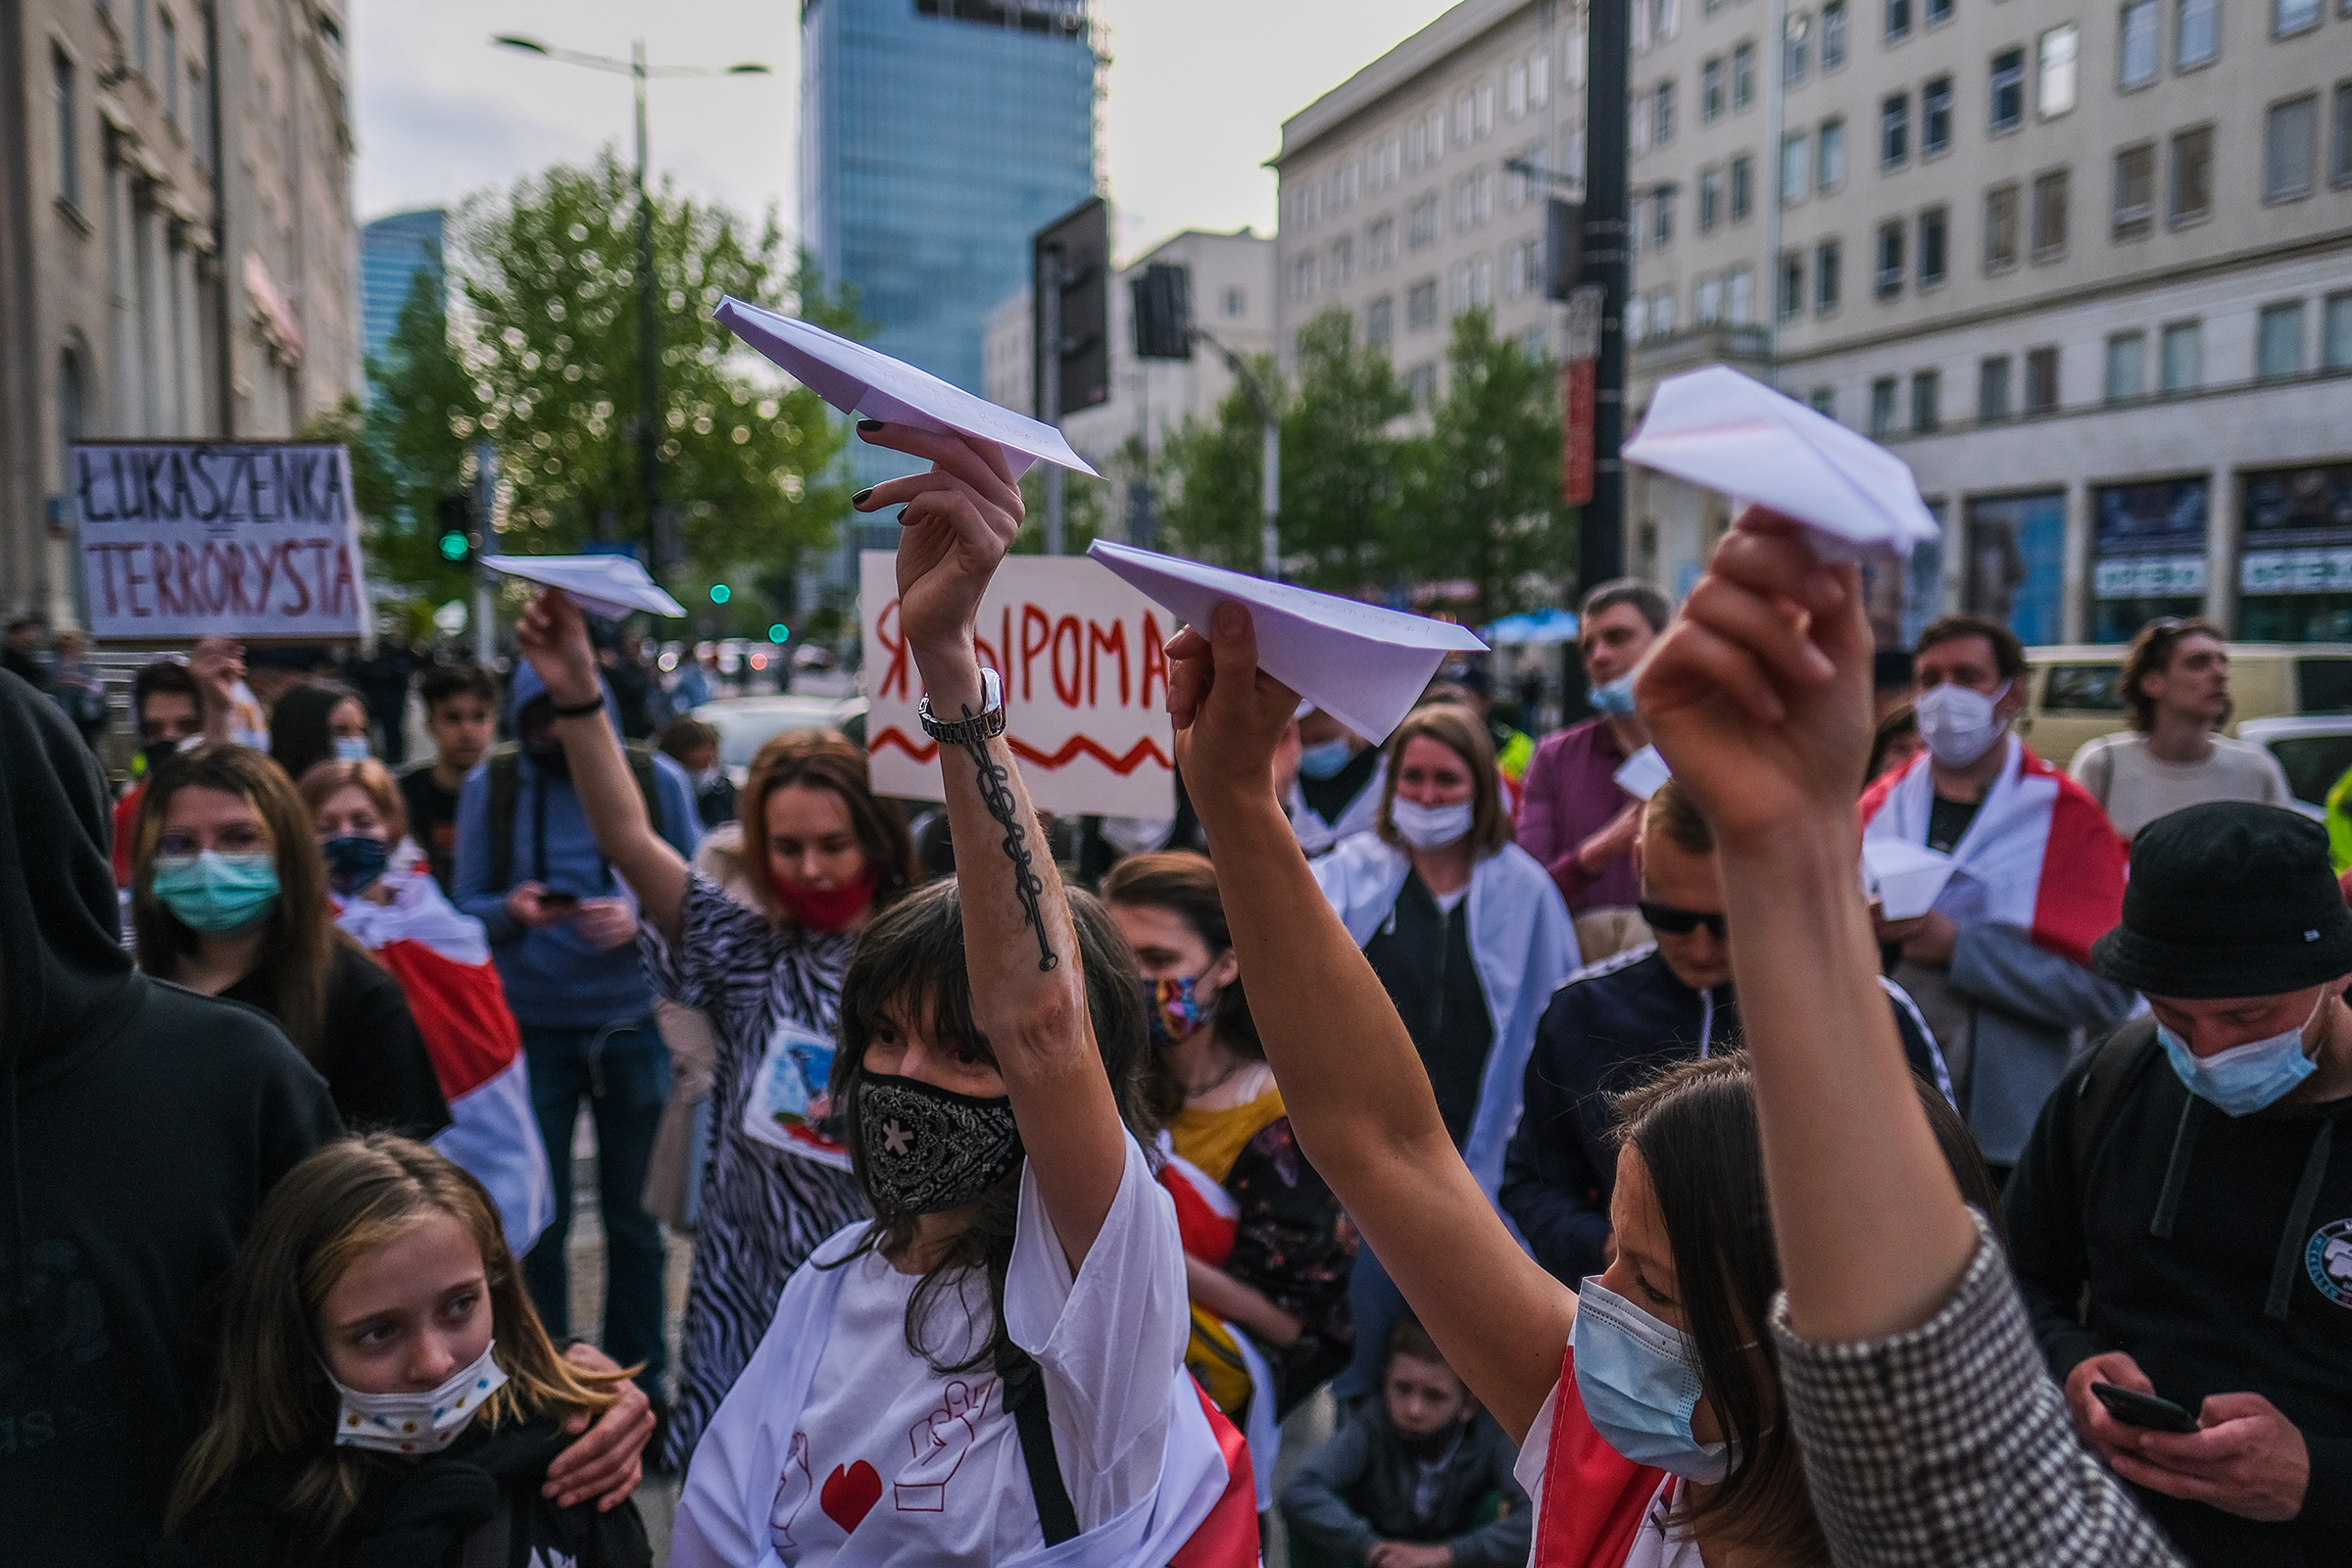 People hold paper airplanes during a protest against the detention of the Belarusian journalist Roman Protasevich in Warsaw on May 24, 2021.